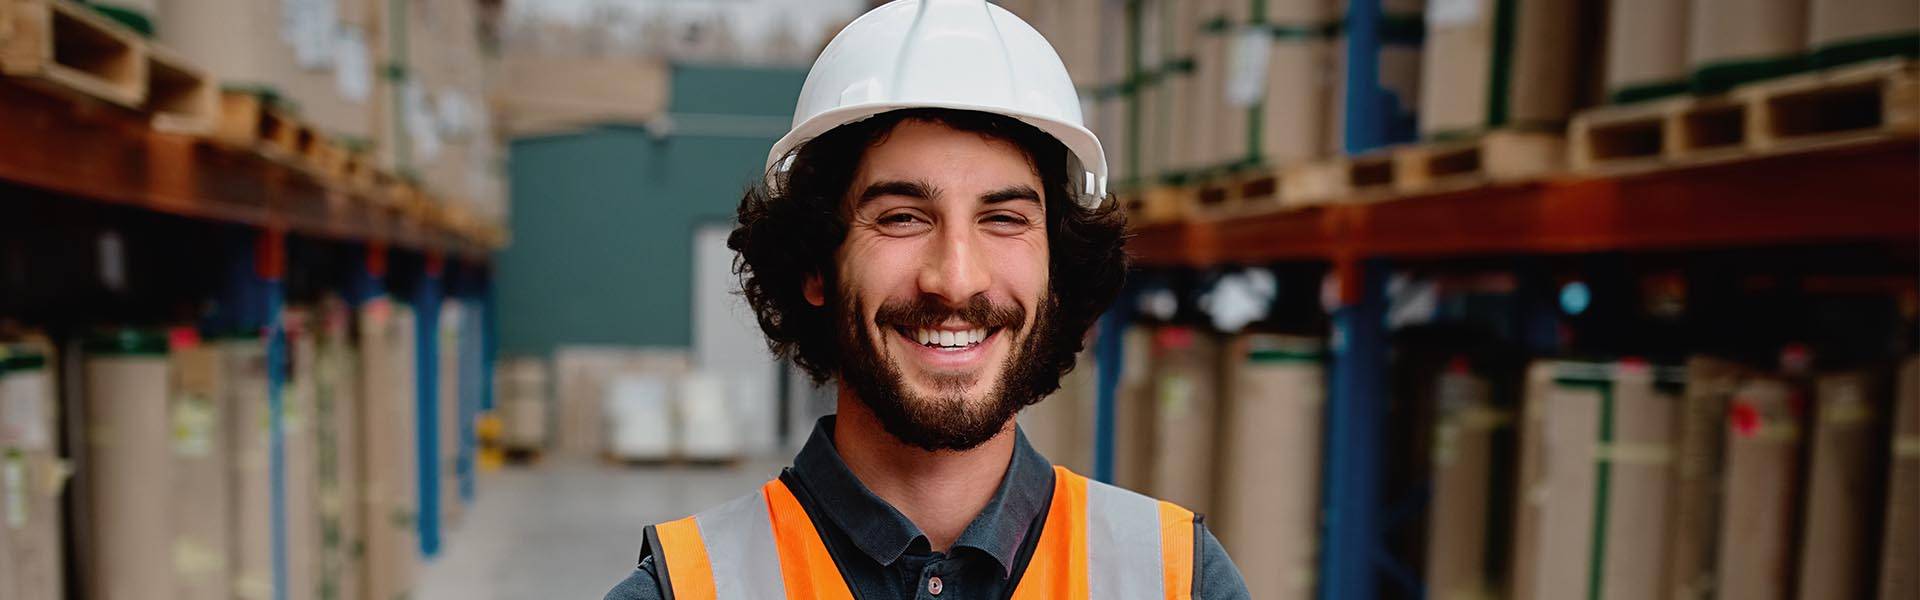 warehouse manufacturing professional smiling